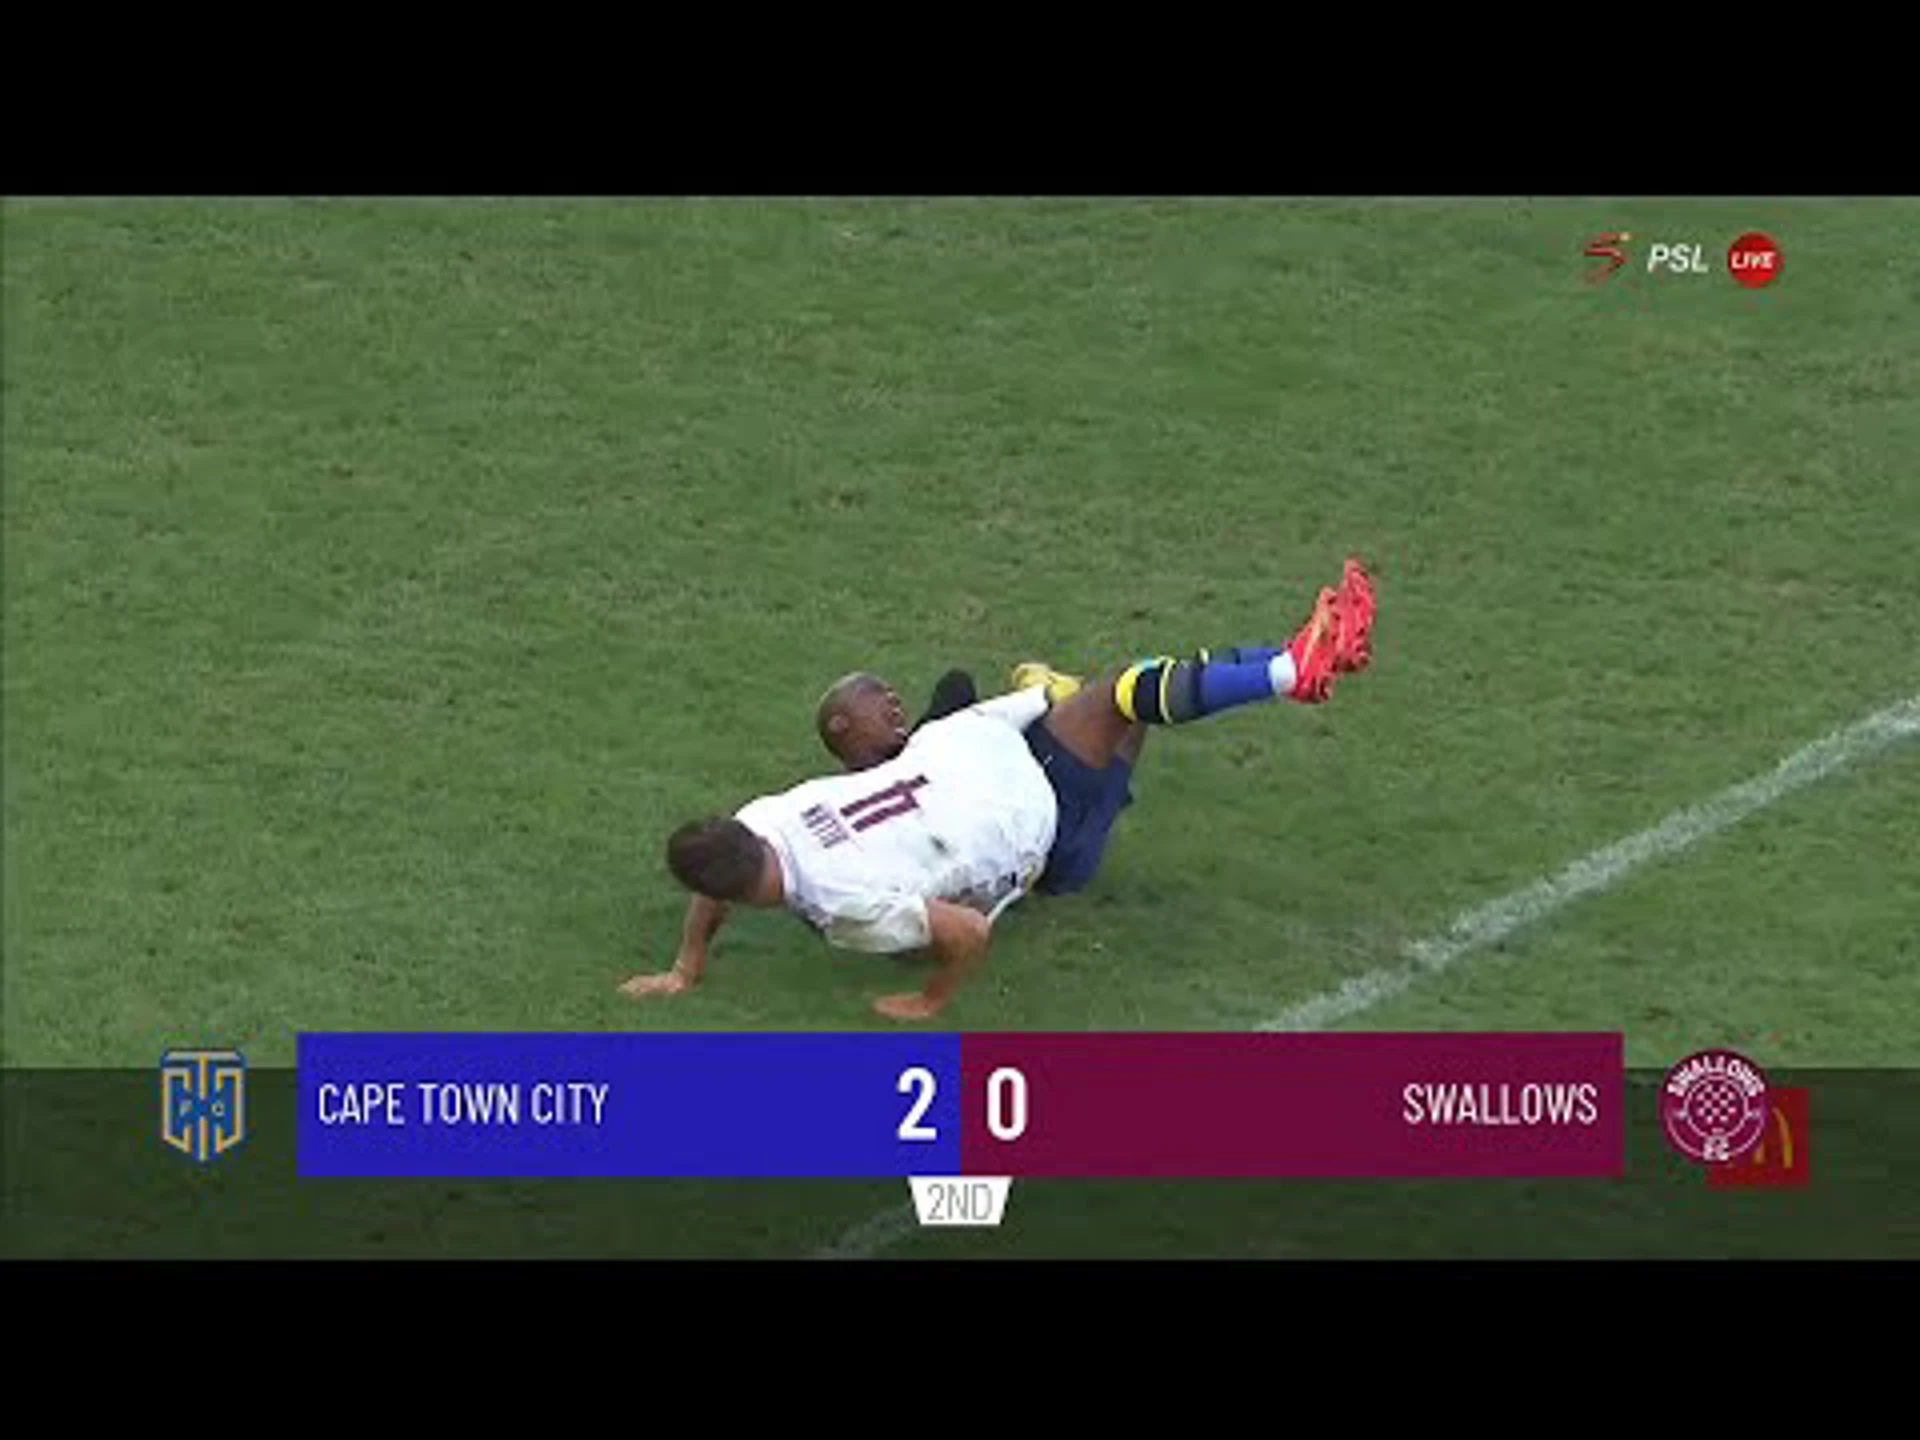 Keegan Allan with a Red Card vs. Cape Town City